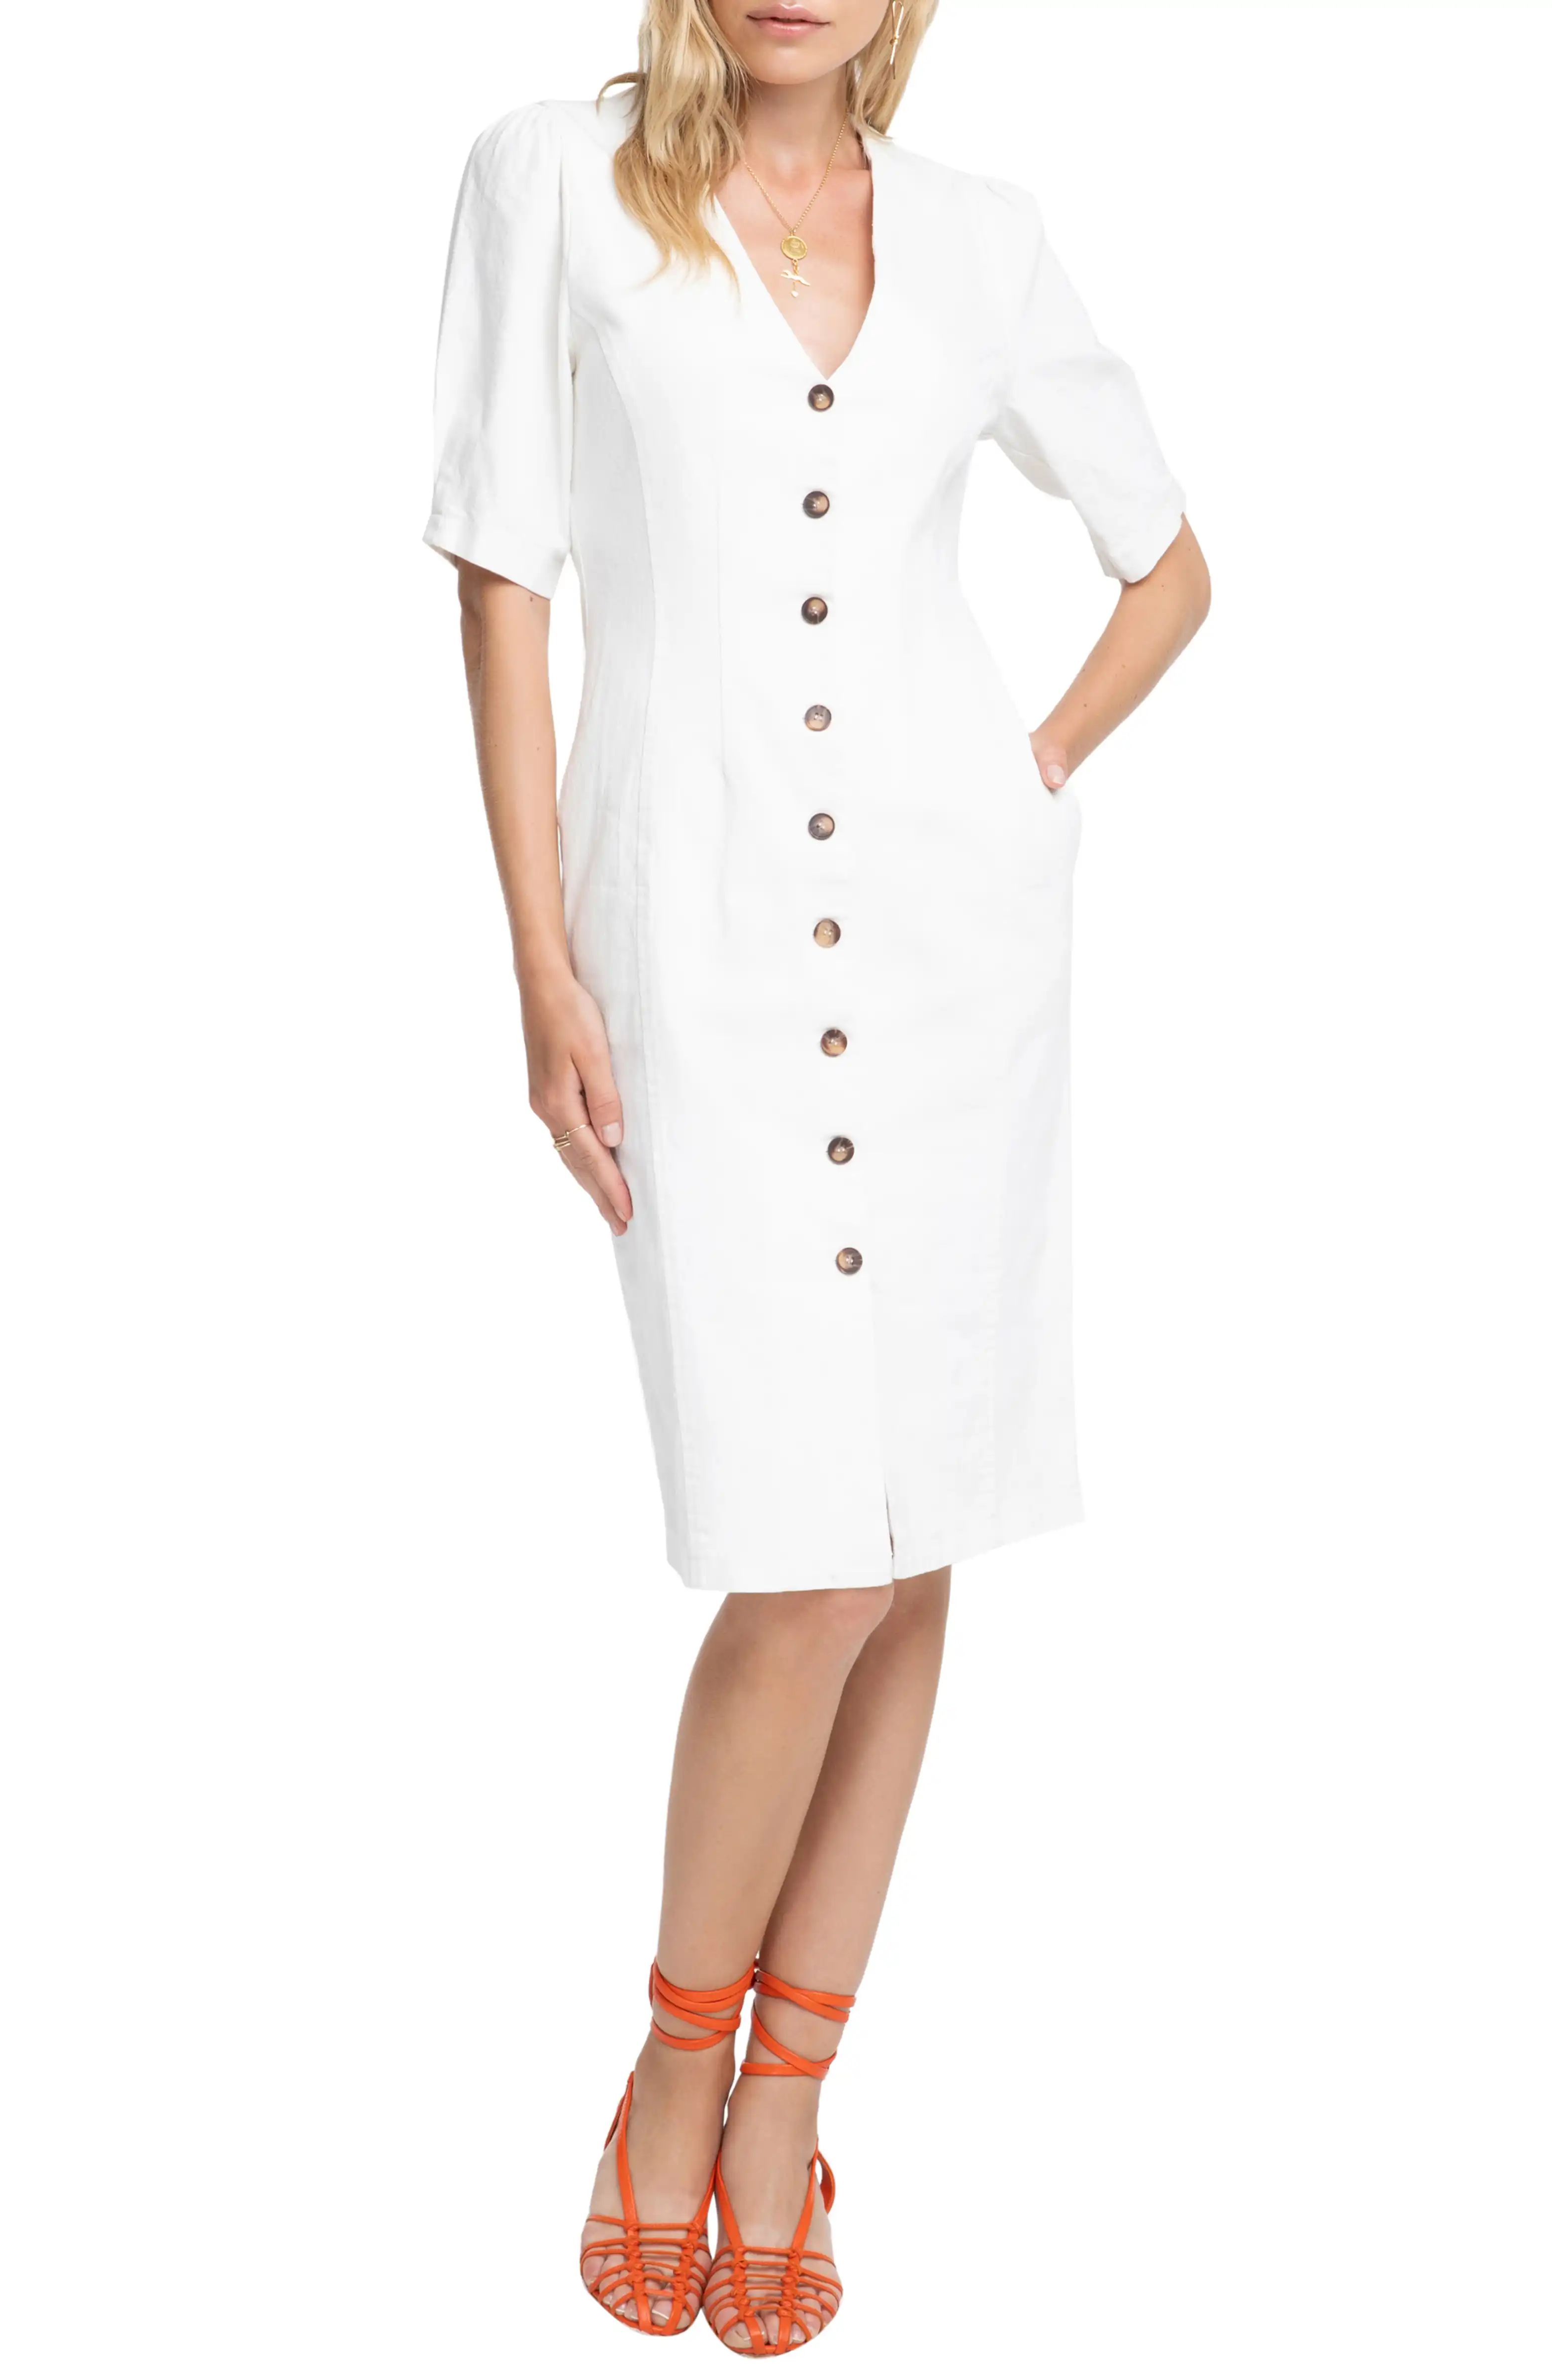 Logan DressASTR THE LABELPrice$120.00Free ShippingContrast buttons add an extra touch of retro-ch... | Nordstrom